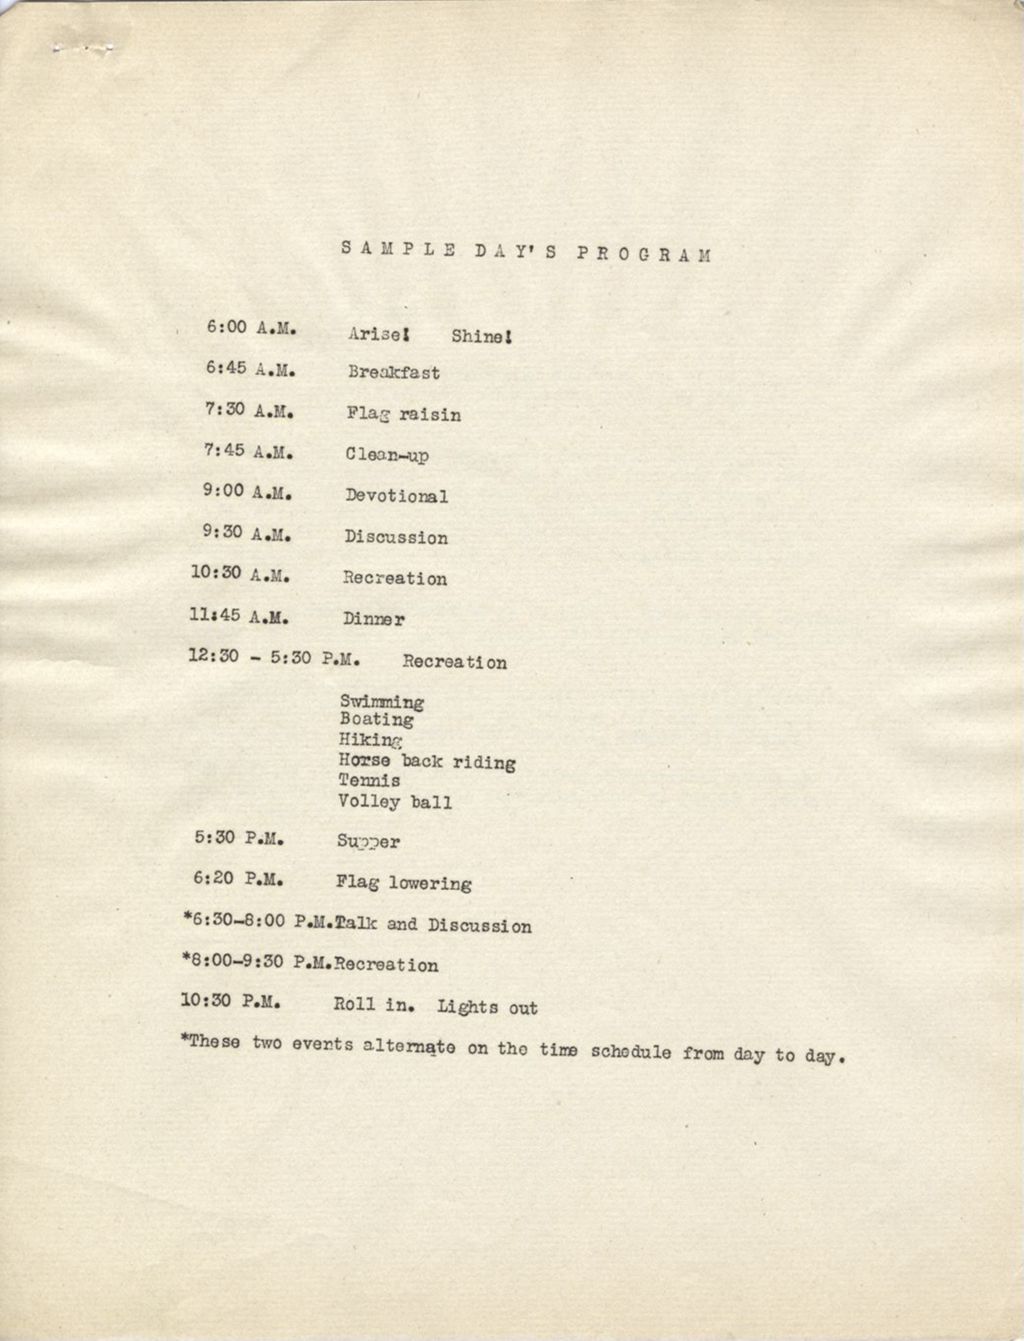 Miniature of Conference program of lectures at Camp Gray, p. 2